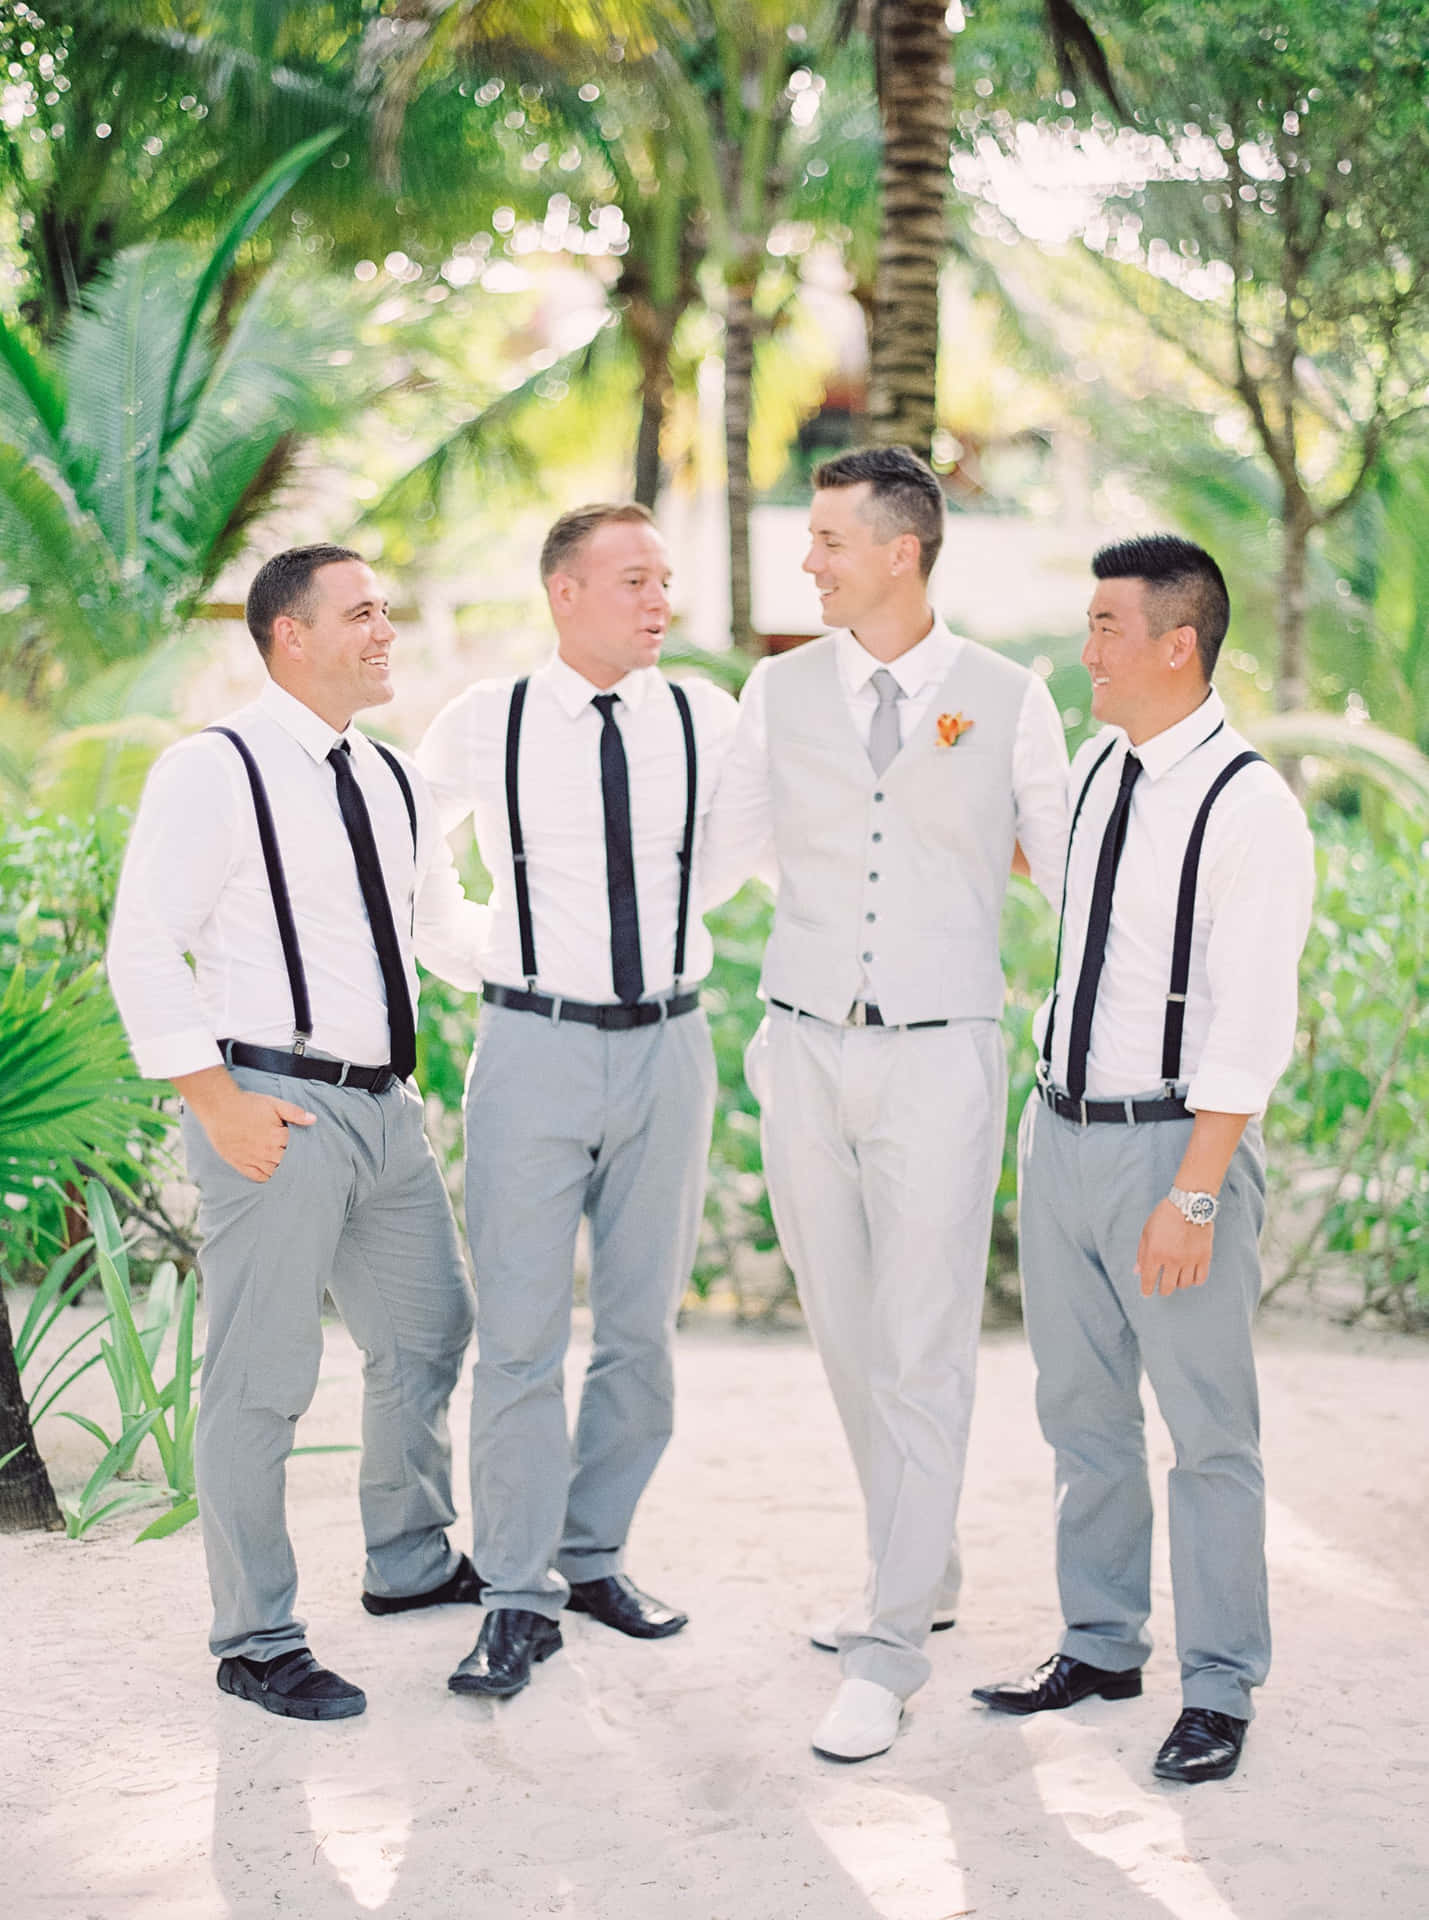 Groom and groomsmen in formal attire, ready to celebrate the special day!